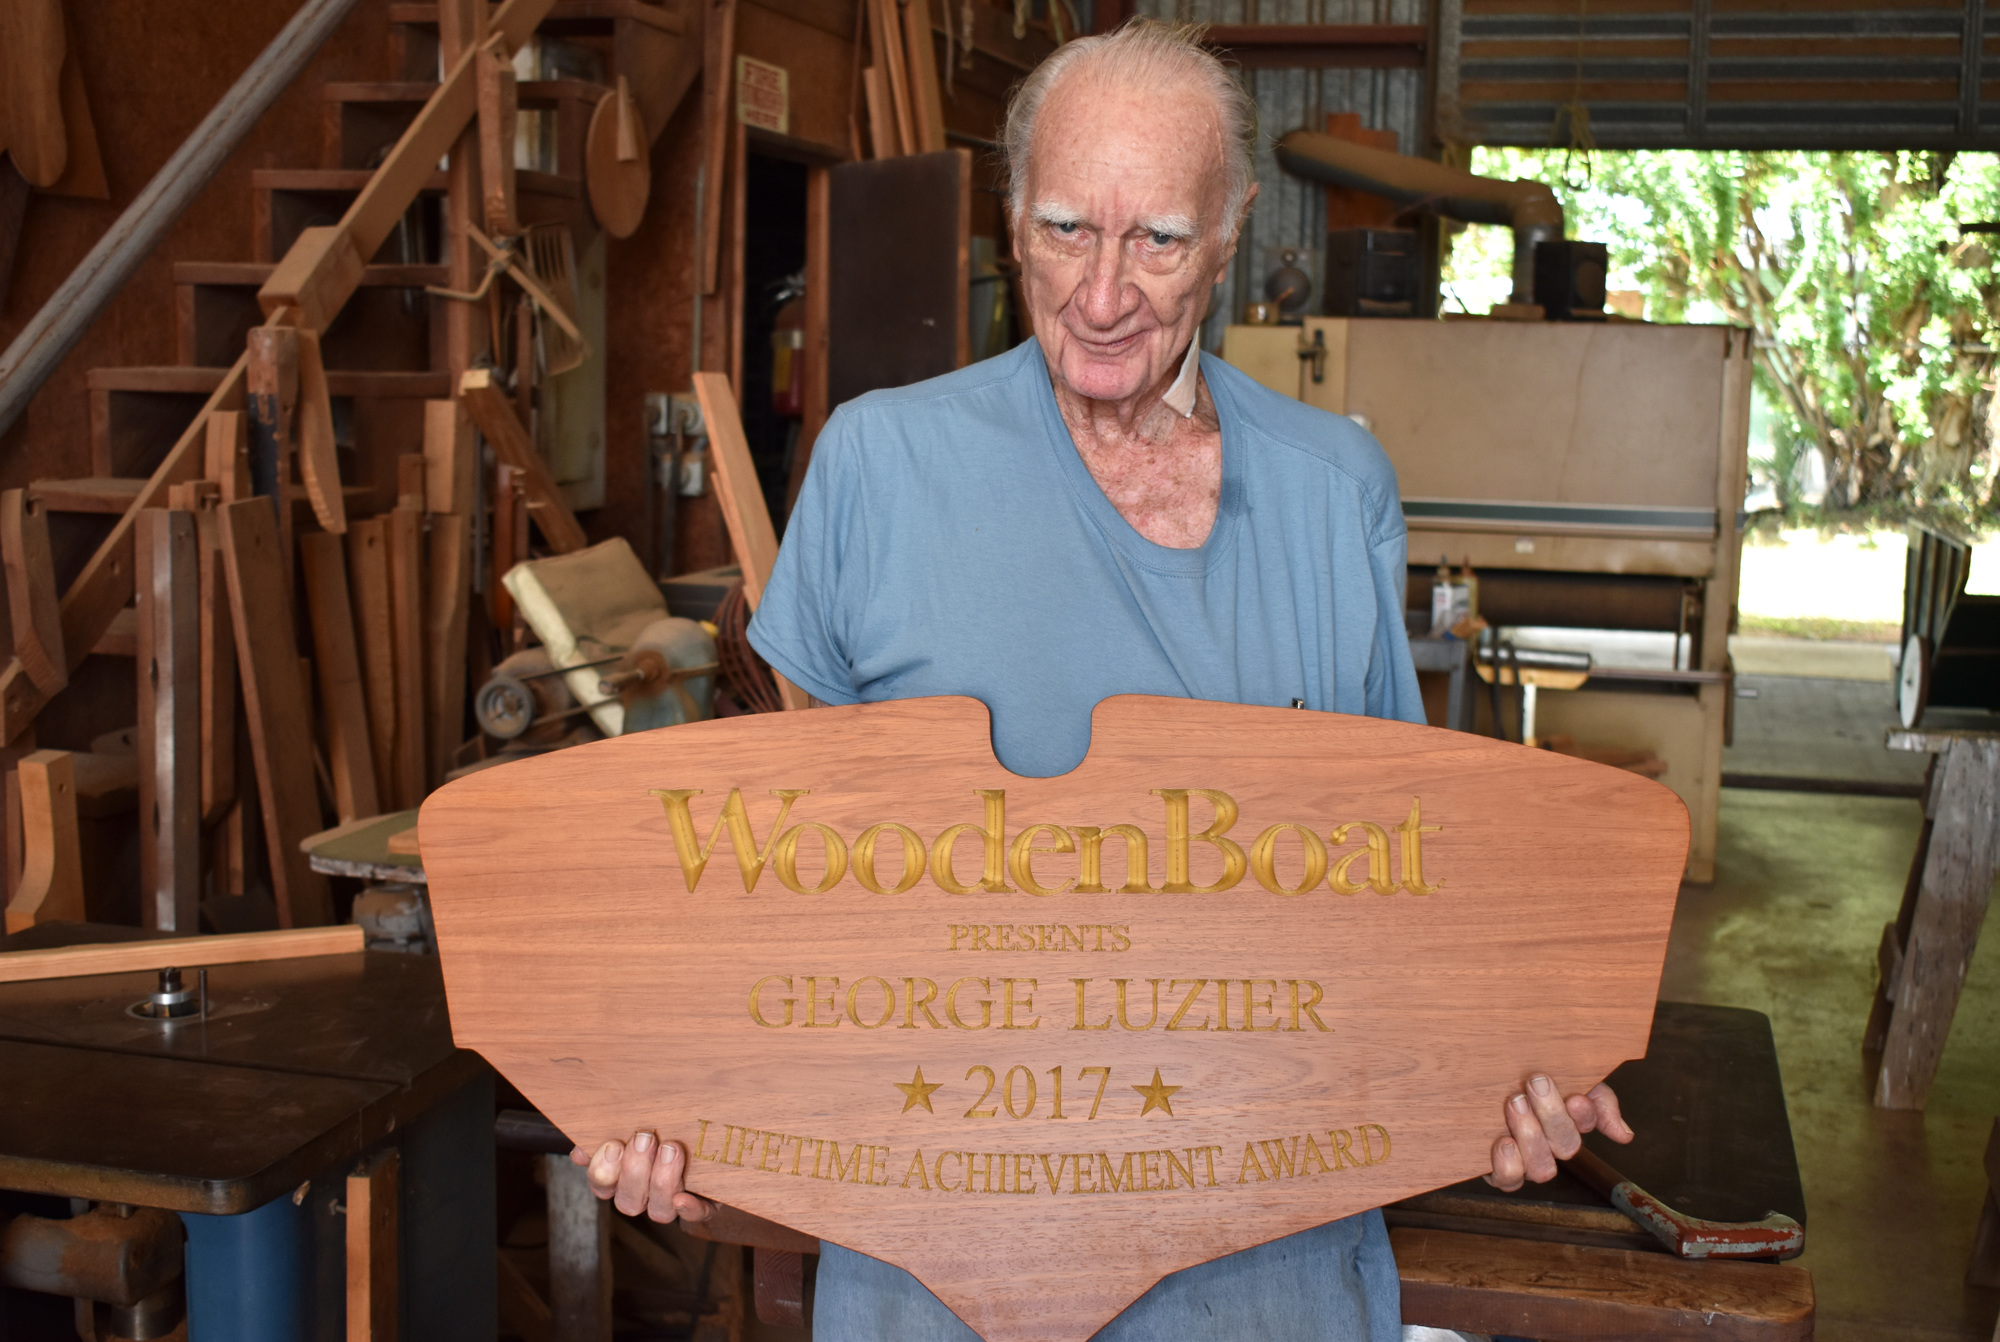 WoodenBoat Magazine recognized George Luzier with a Lifetime Achievement Award in July for 80 years of work. Photo by Niki Kottmann